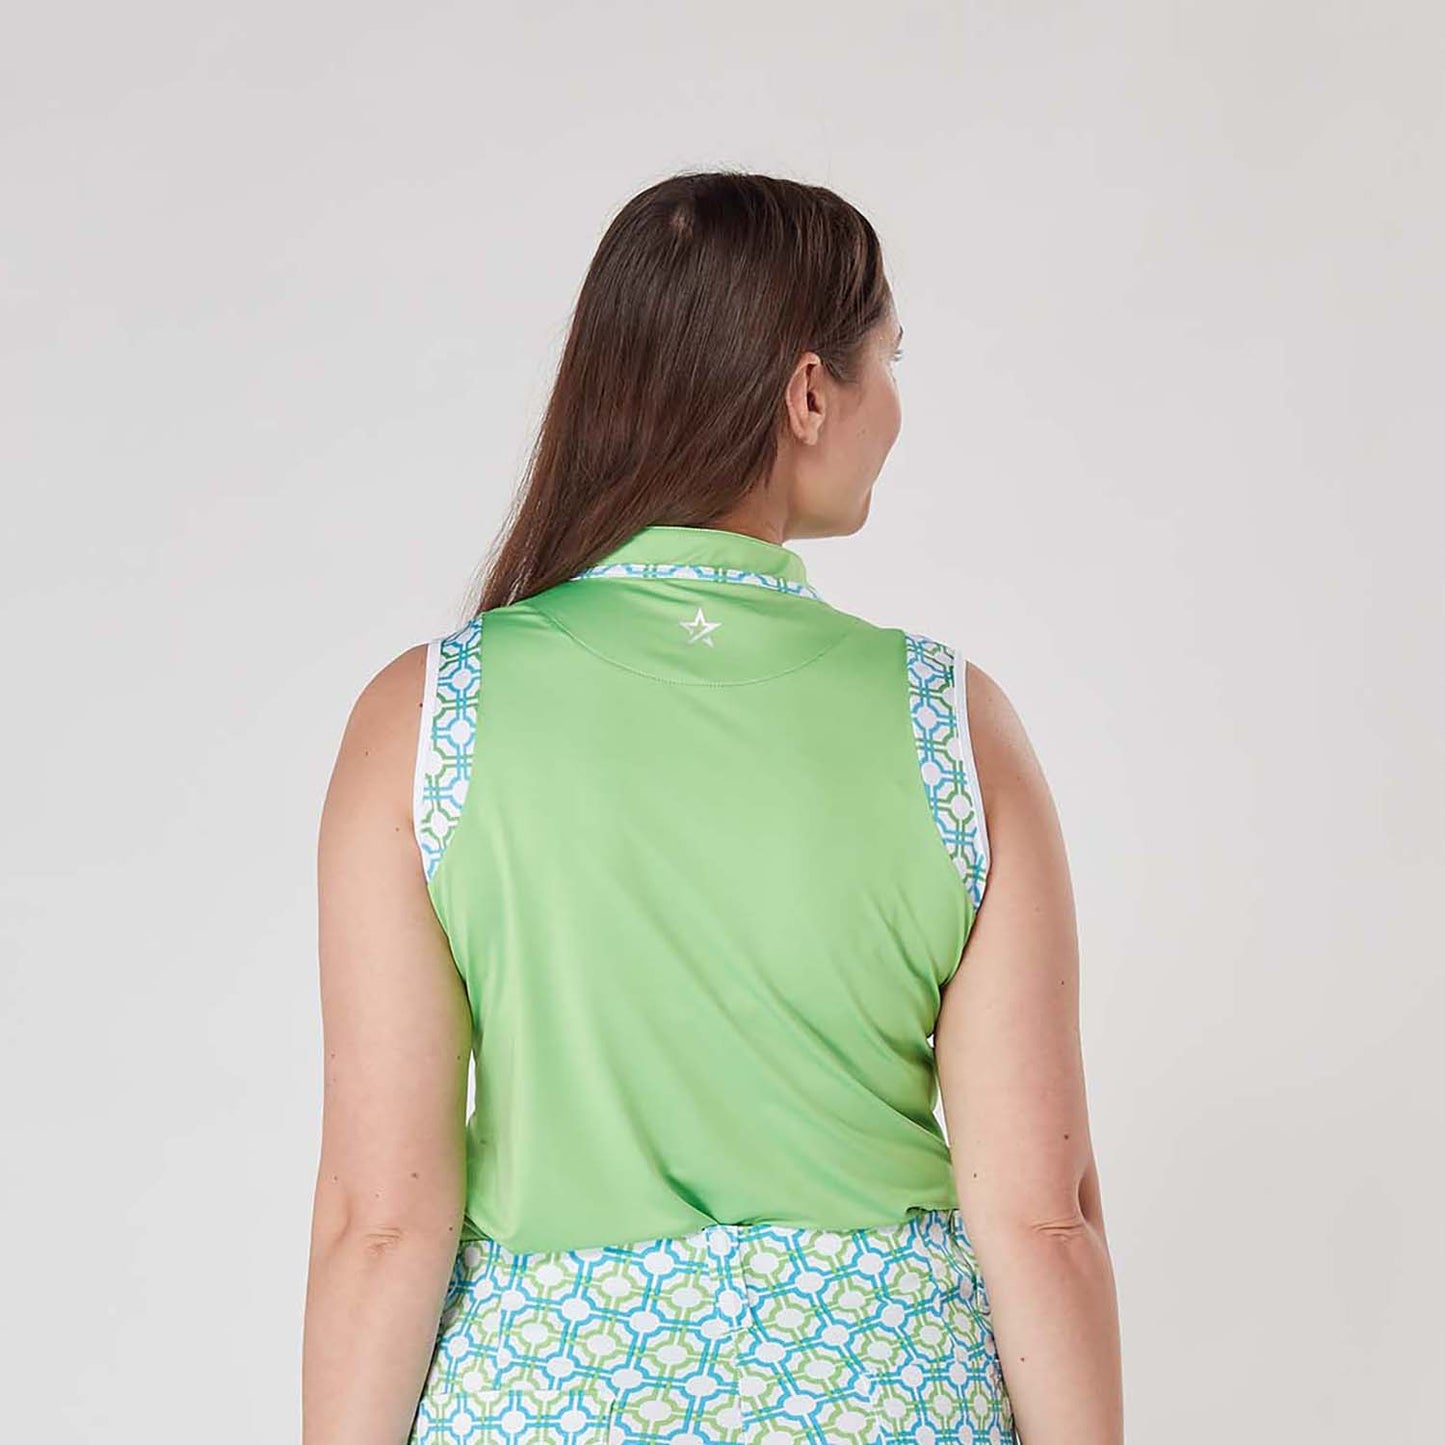 Swing Out Sister Ladies Sleeveless Print Polo in Dazzling Blue and Emerald with Zip-Neck